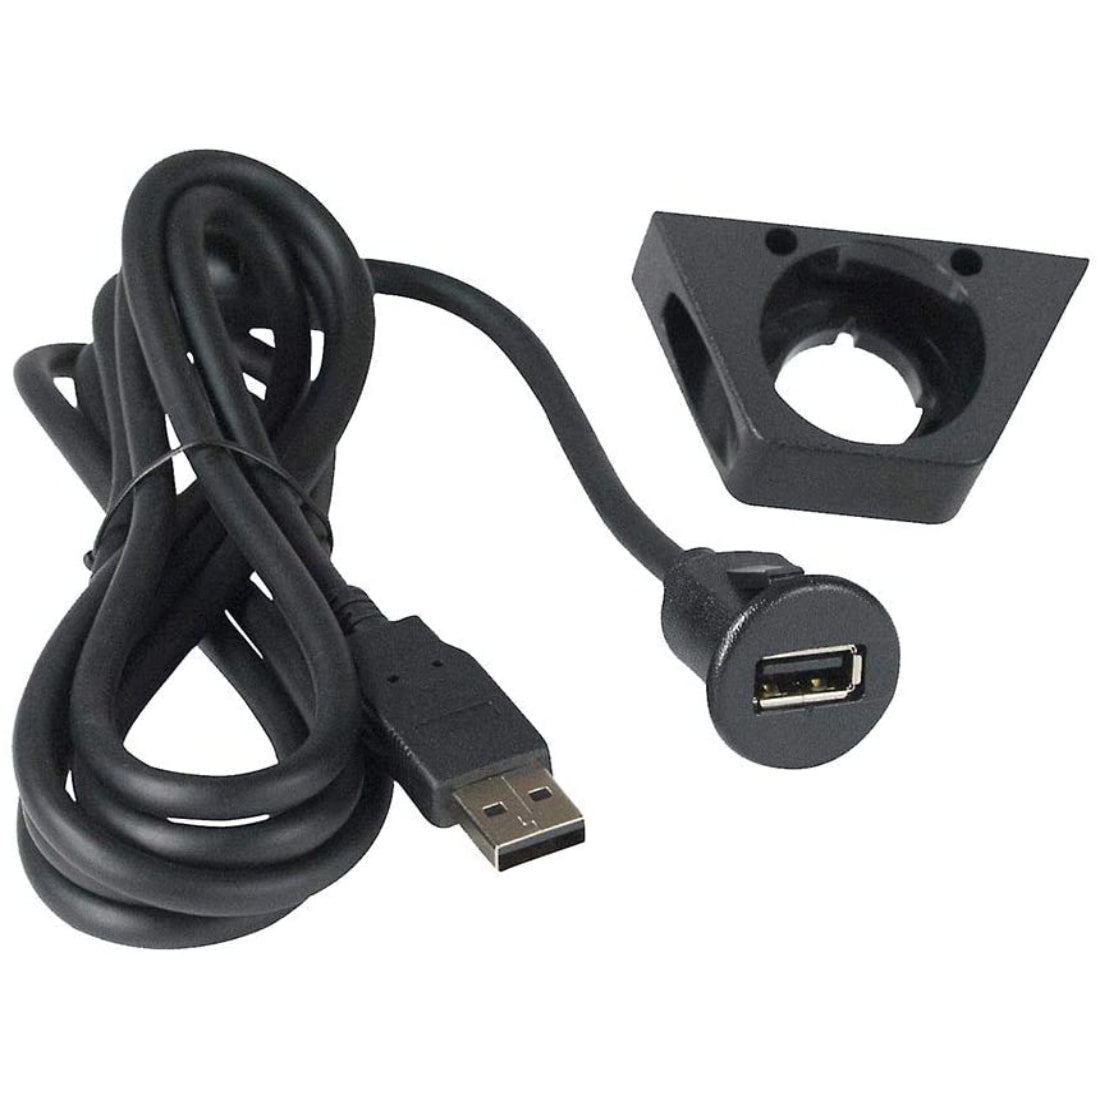 PAC USBDMA6 6FT Car Stereo Dash Mount USB Extension Cable Adapter